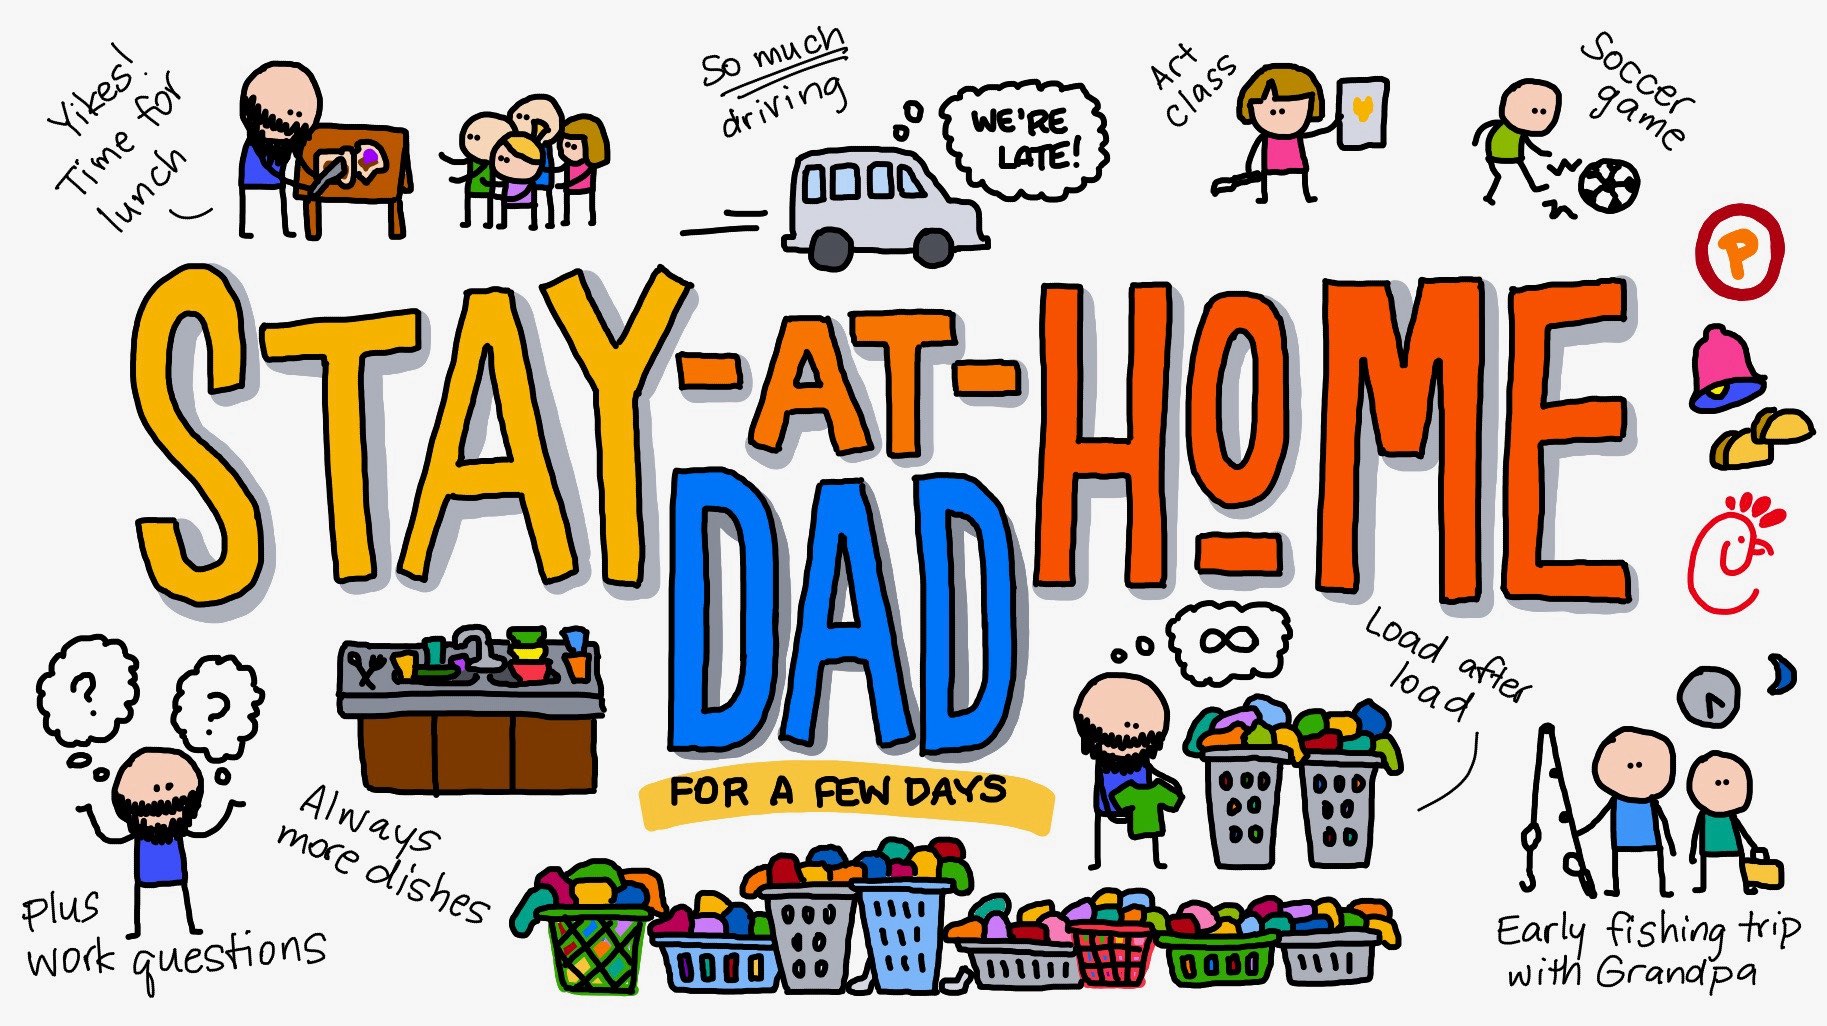 Stay at home dad sketchnote